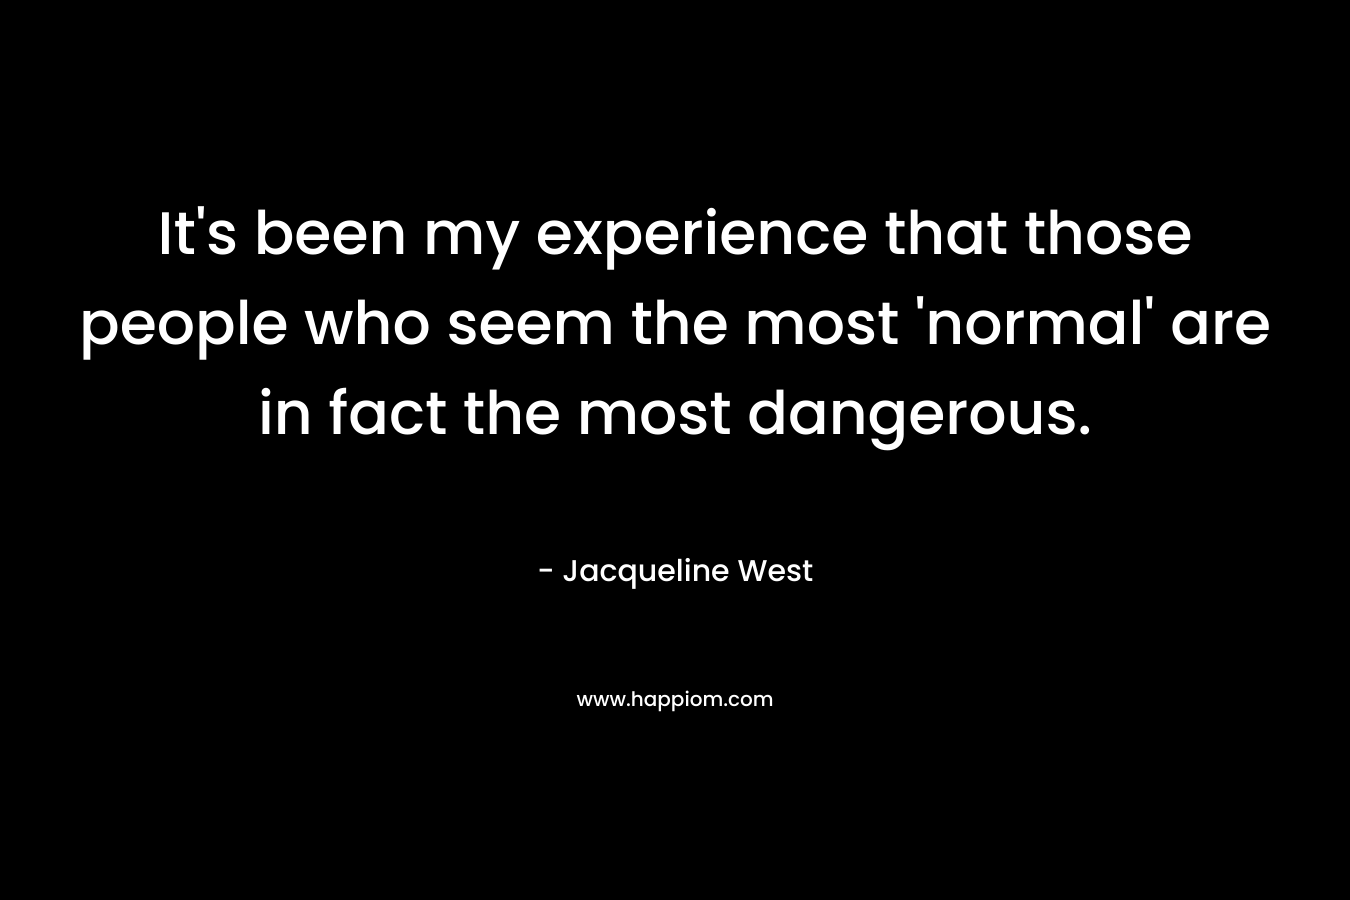 It’s been my experience that those people who seem the most ‘normal’ are in fact the most dangerous. – Jacqueline West